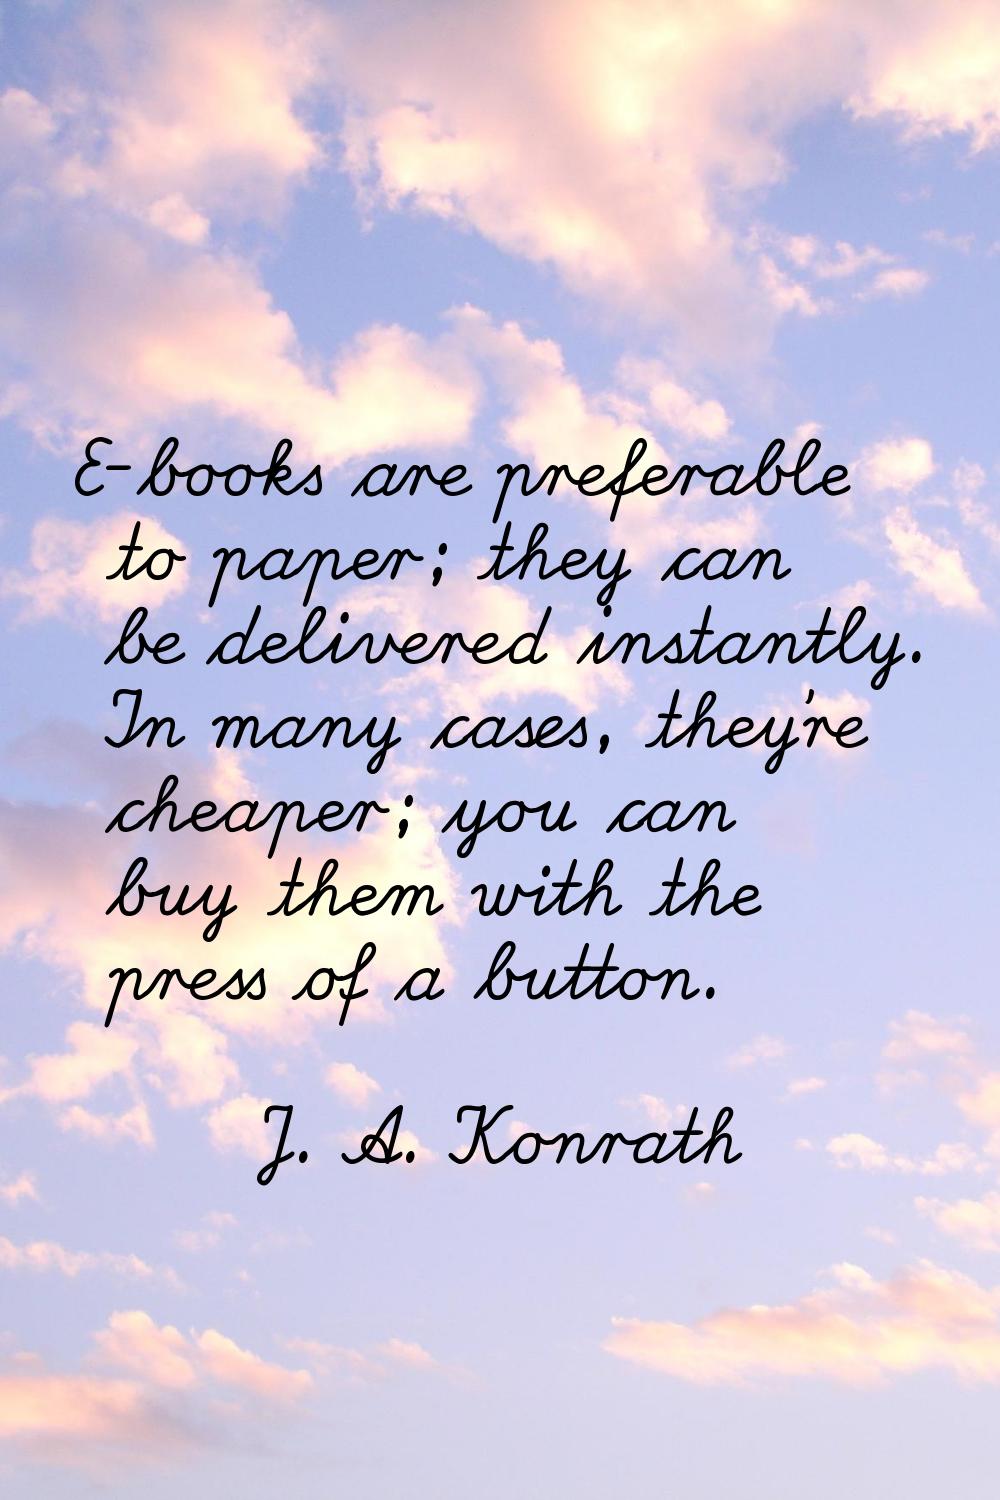 E-books are preferable to paper; they can be delivered instantly. In many cases, they're cheaper; y